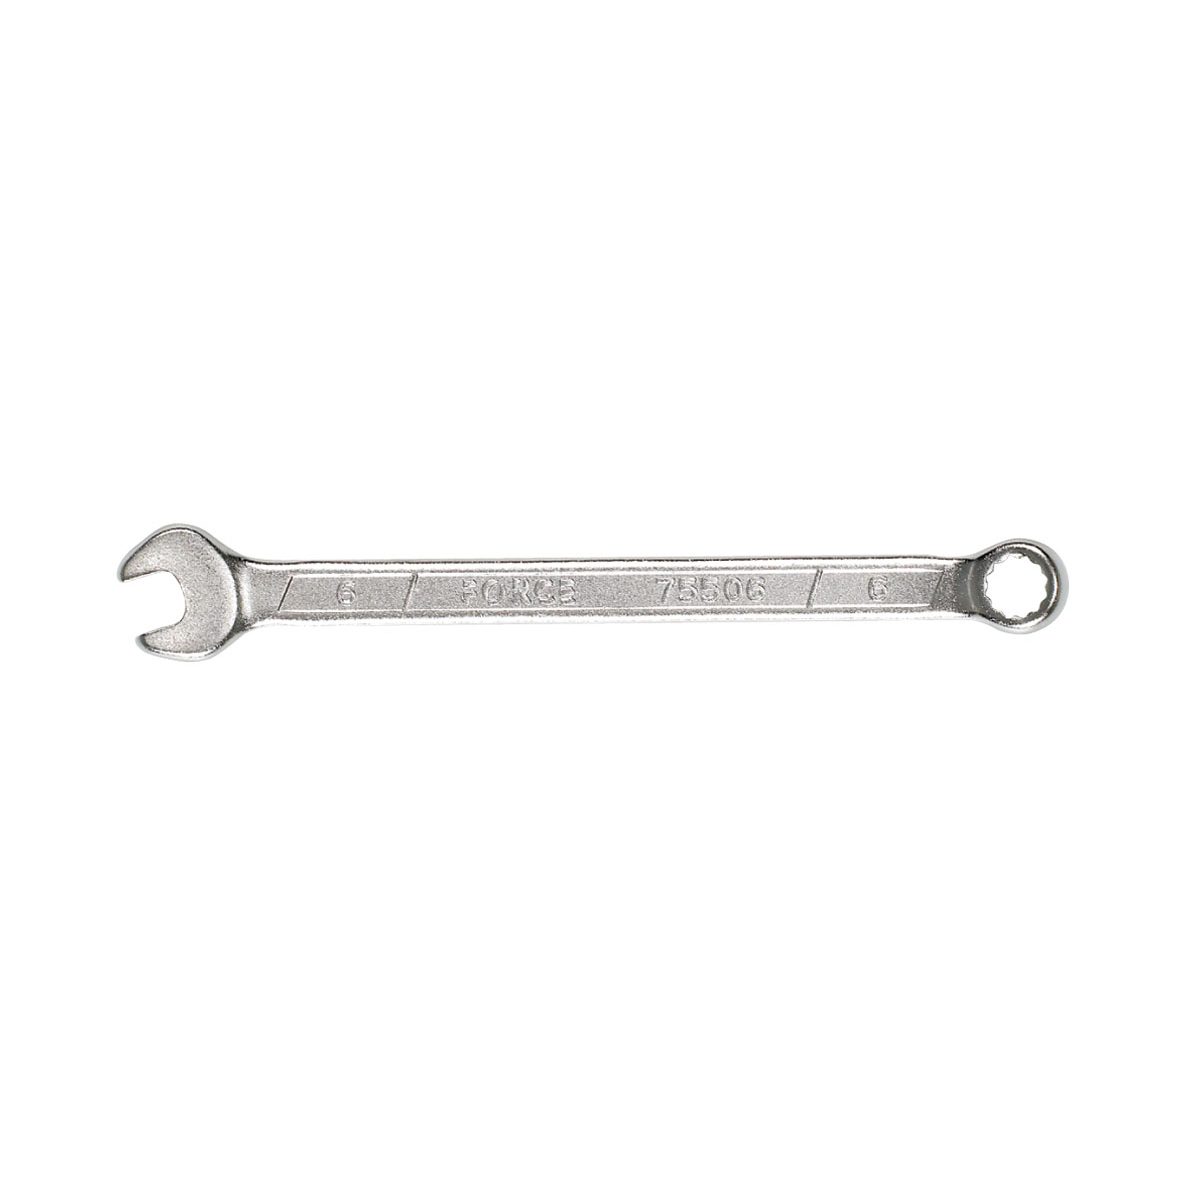 CYCLO 21mm Open/Ring Spanner